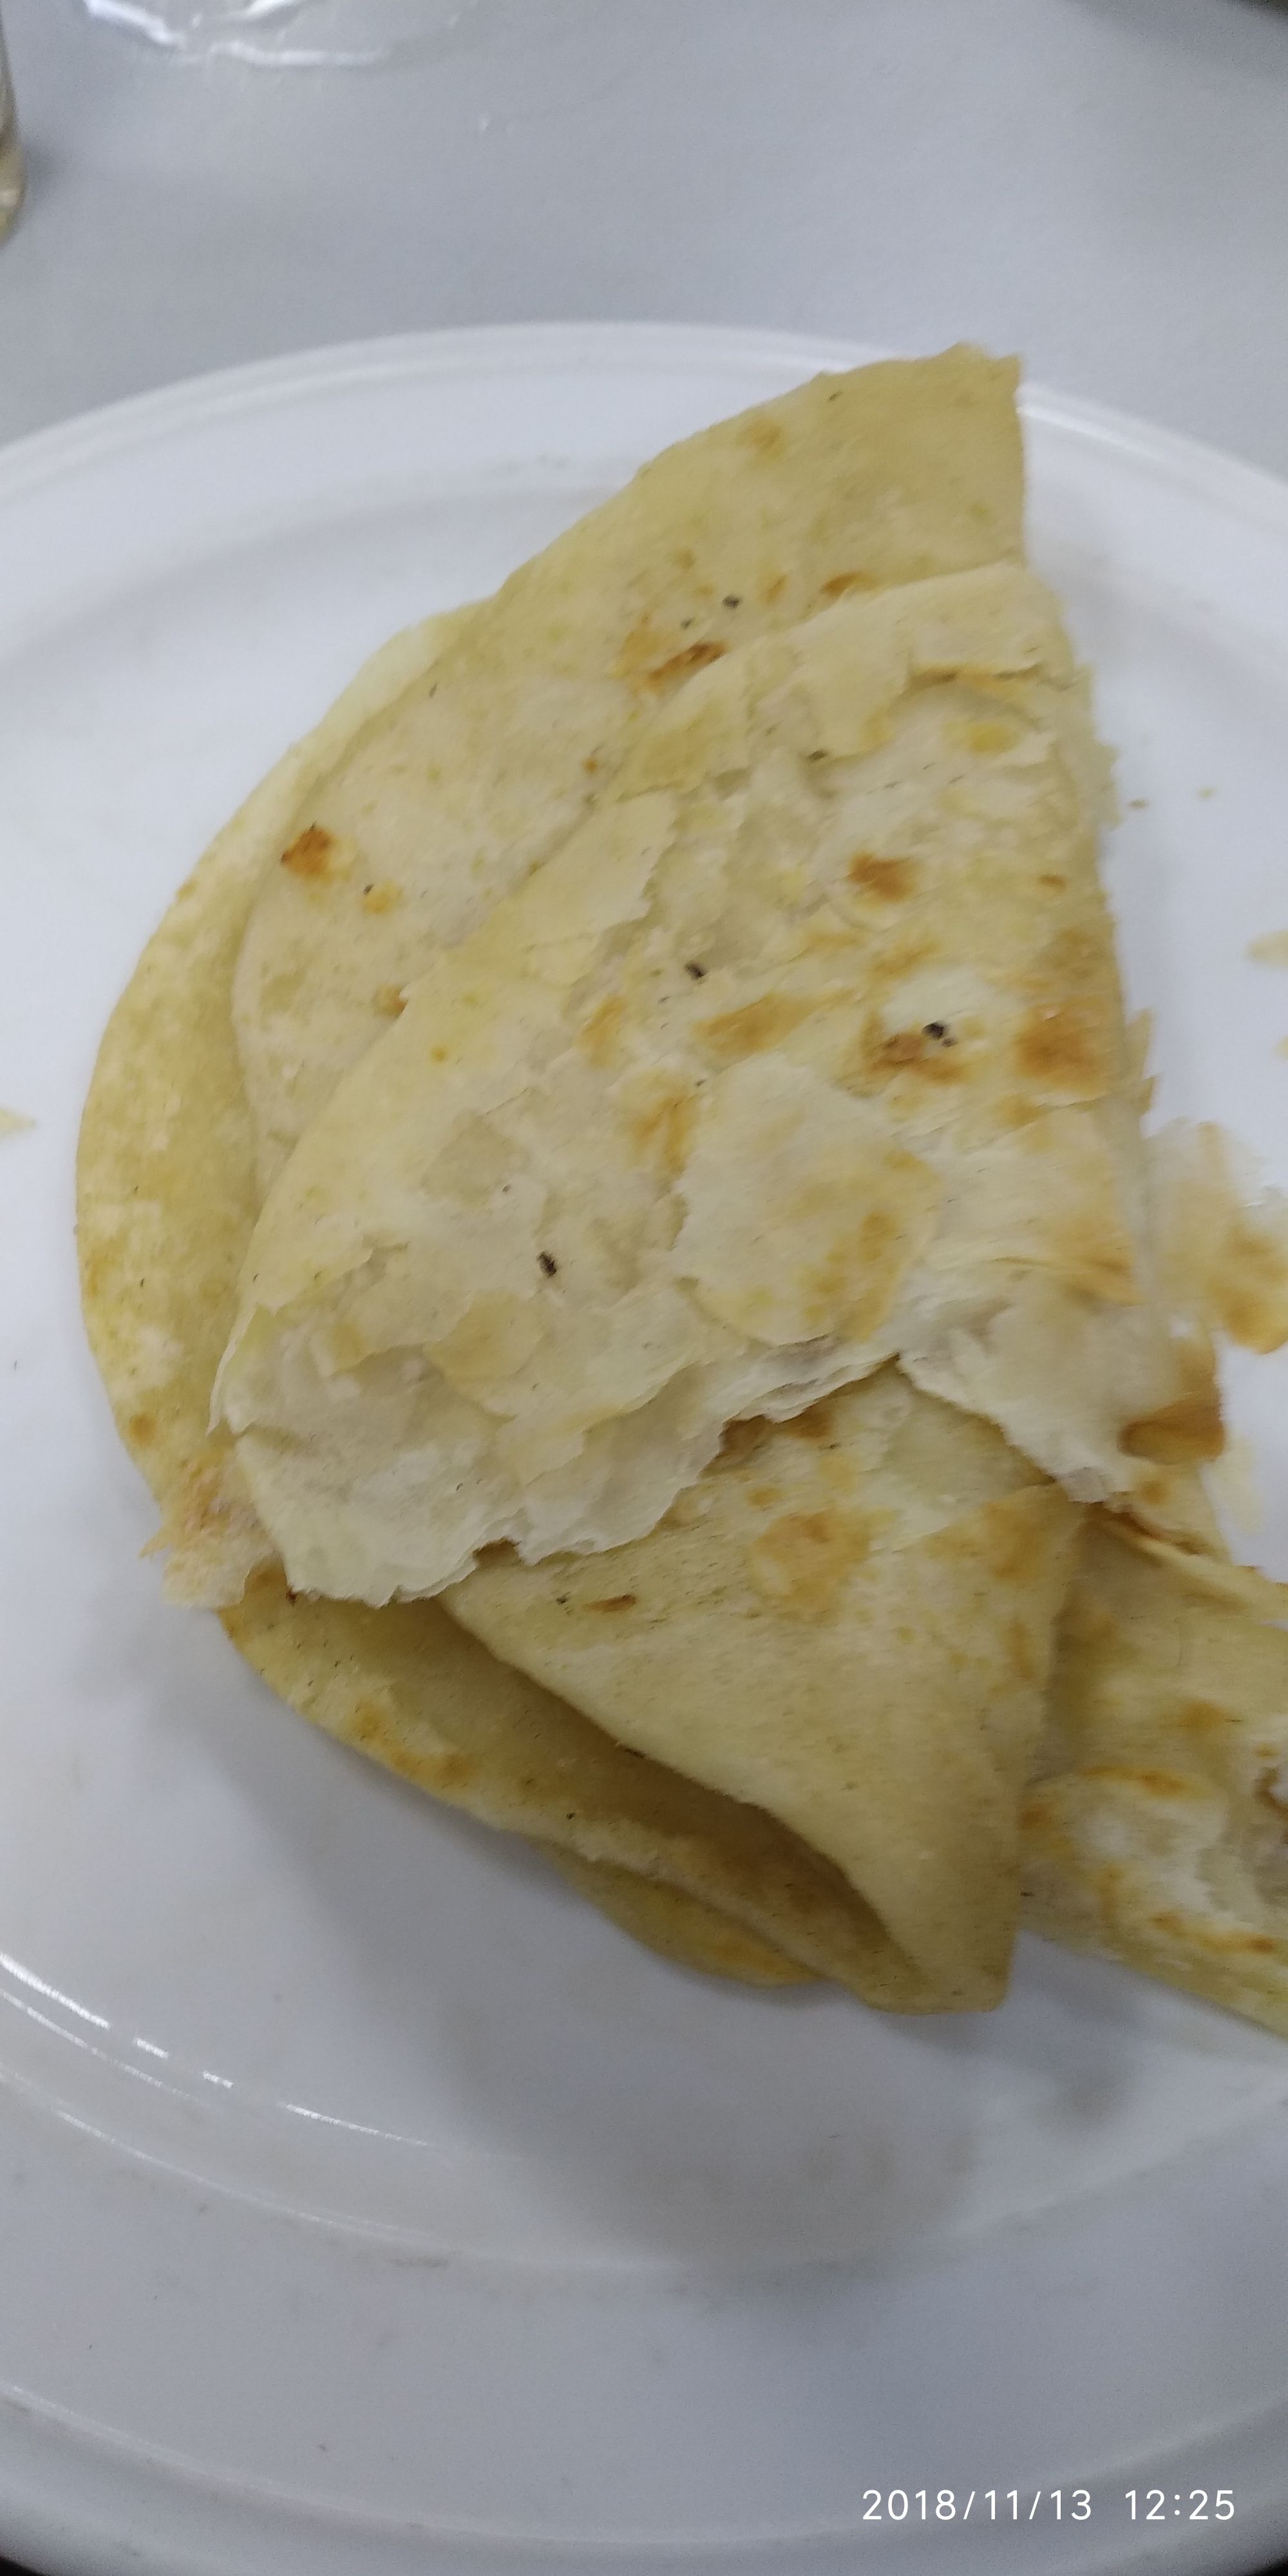 Paratha. Bdt 6 taka per piece.u can chose two tipe of paratha, one is oily and another one is non oily. Both are crispy and crunchy. It's prepared with flour and ghee.